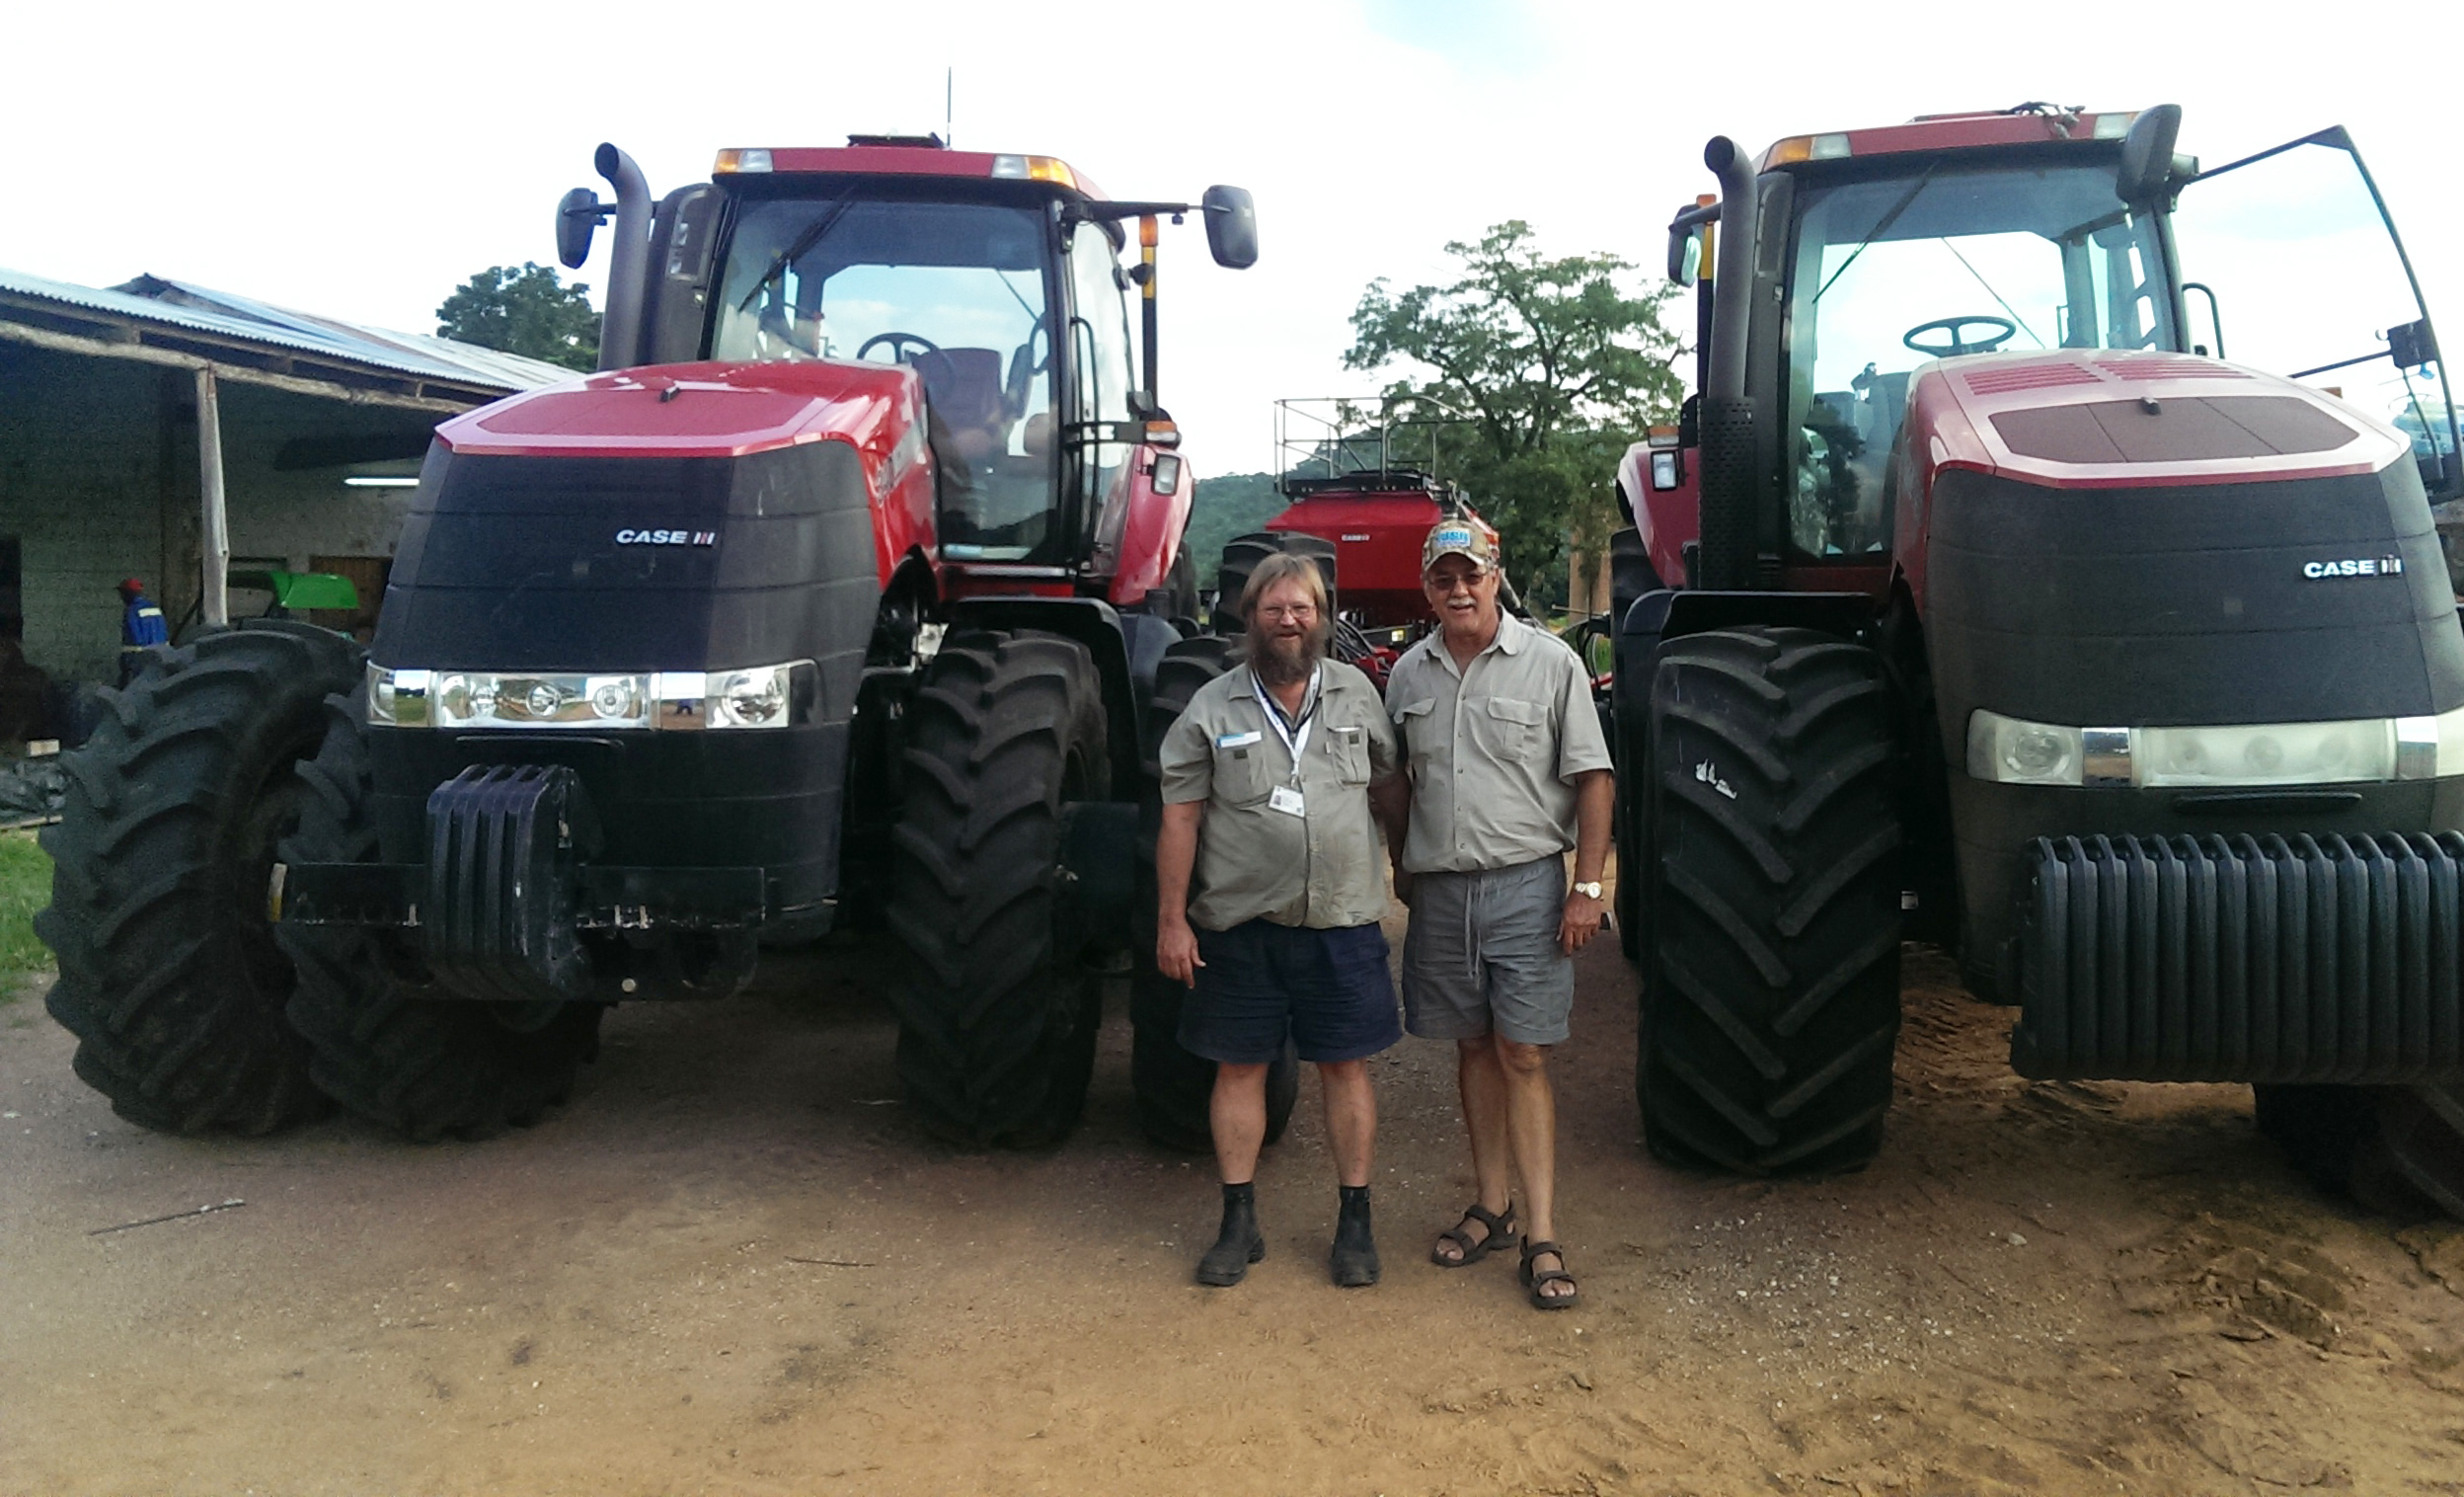 CASE IH APPOINTED NEW AND SUCCESSFUL DISTRIBUTOR IN ZIMBABWE